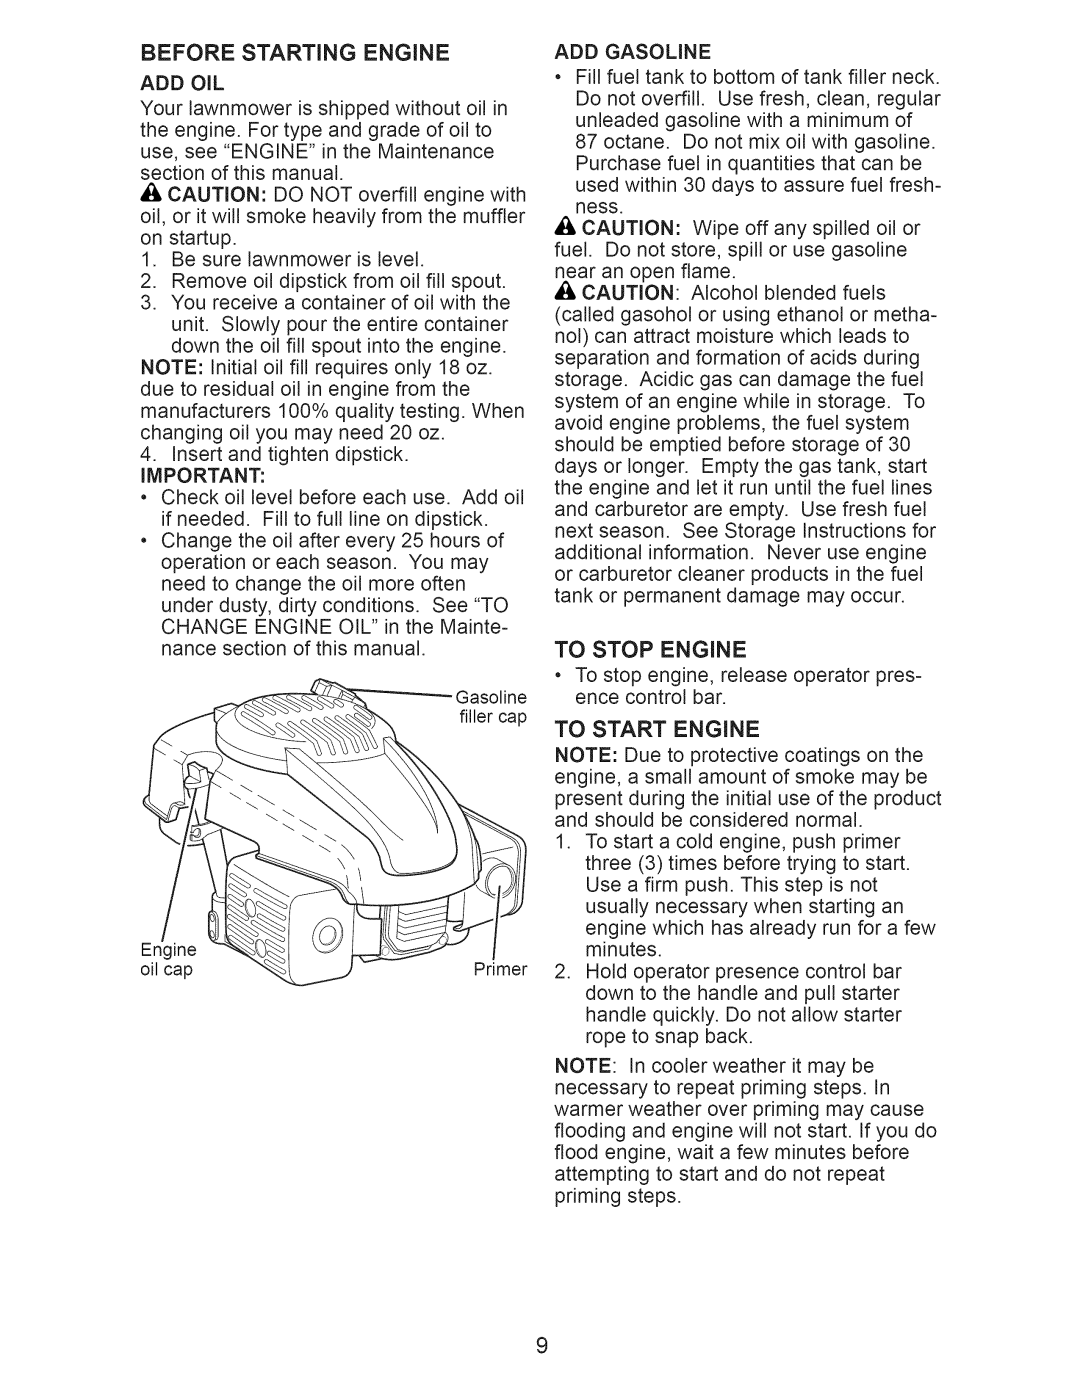 Craftsman 917.375010 owner manual Before Starting Engine, Add Oil, To Stop Engine, To Start Engine 